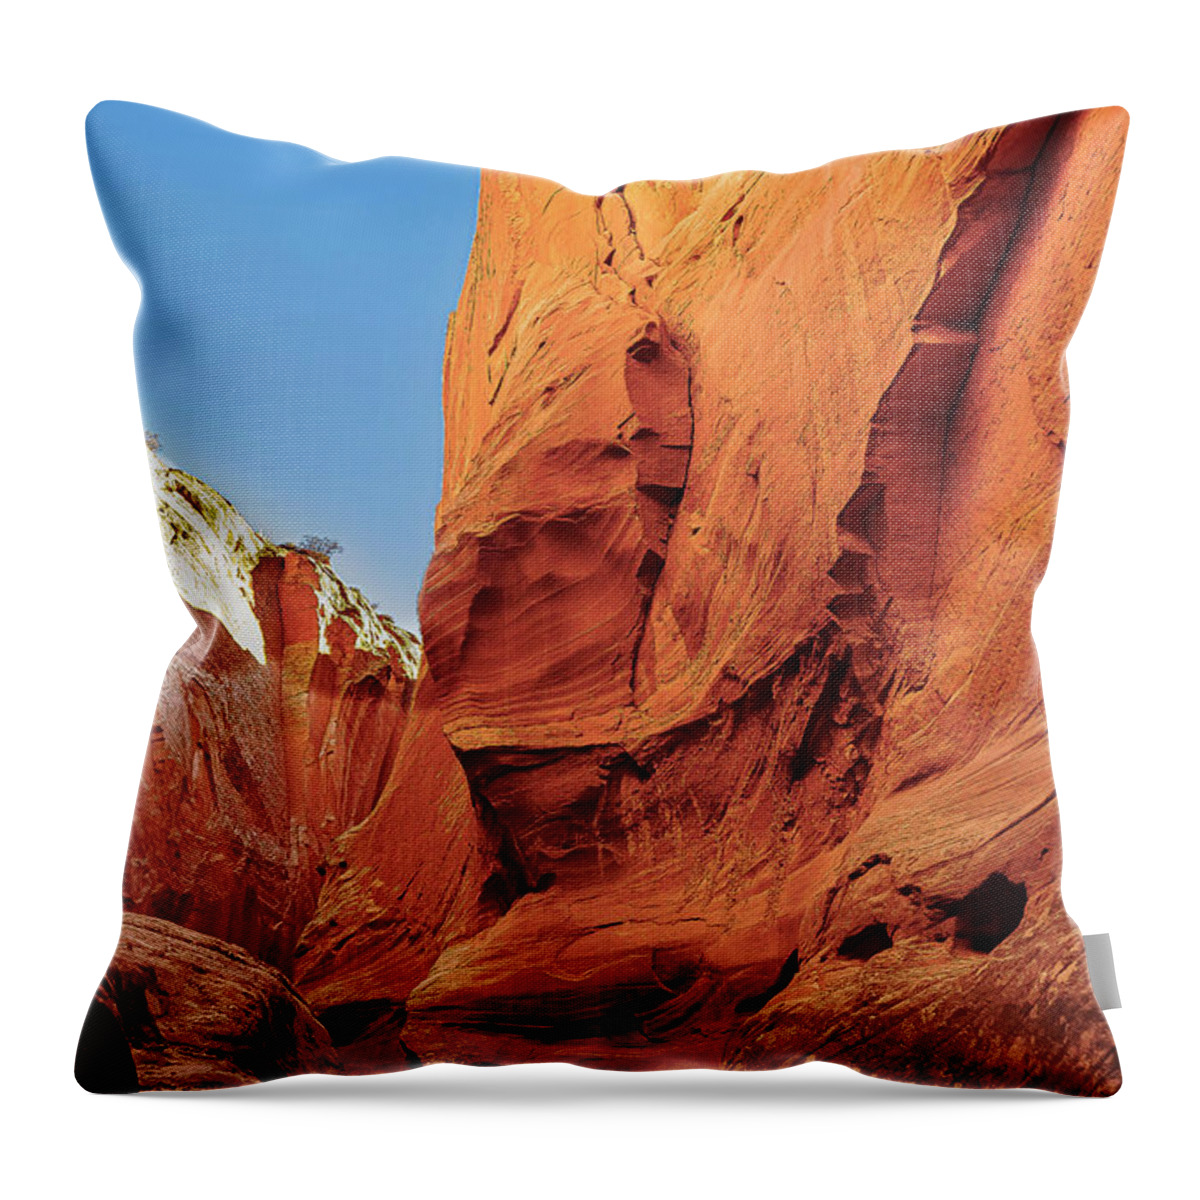 Landscape Throw Pillow featuring the photograph Antilope Series 6 by Silvia Marcoschamer